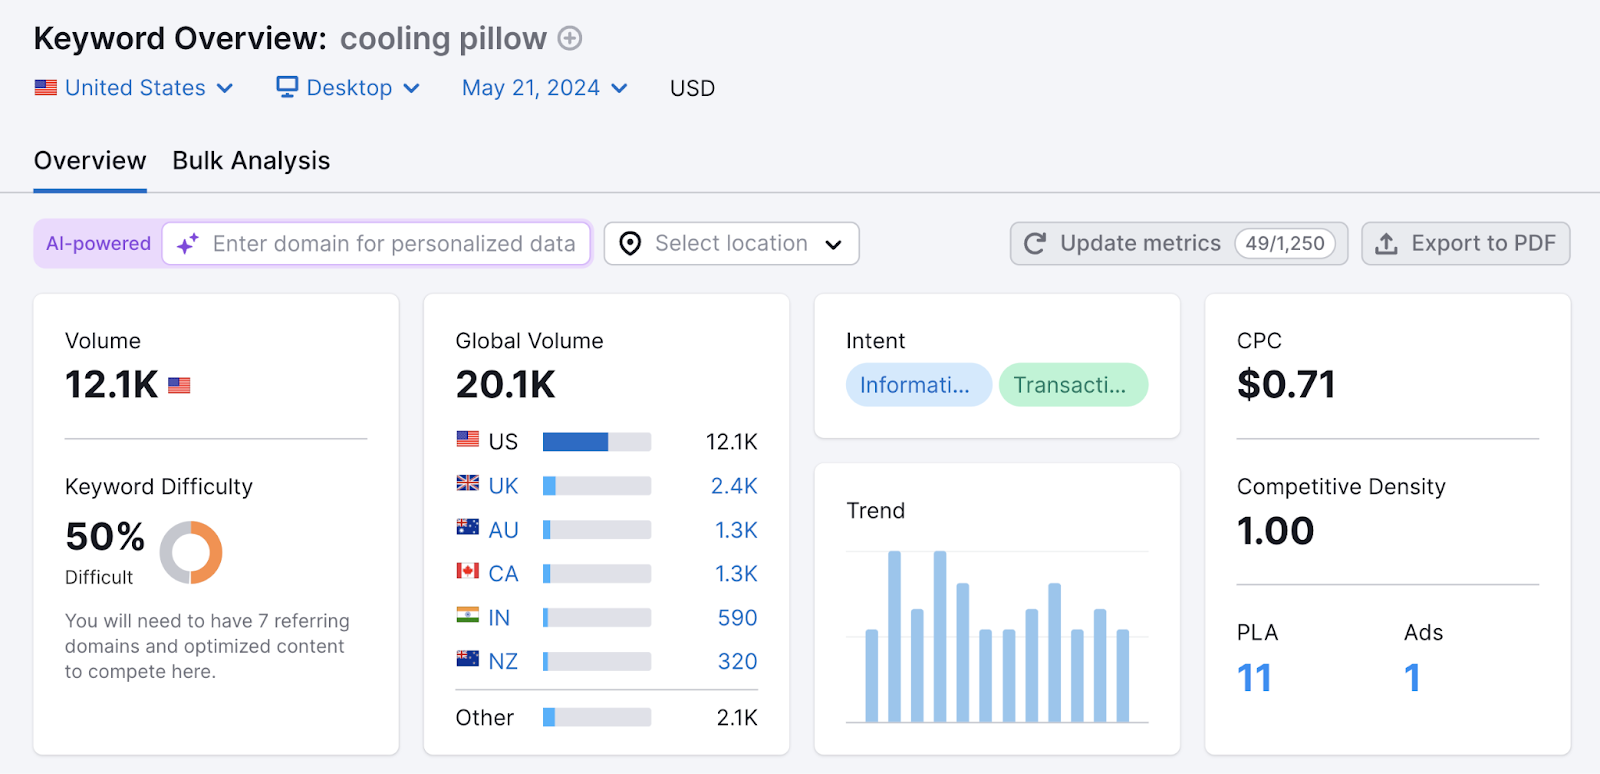 keyword overview data for cooling pillow shows 12.1k monthly search volume, 50% keyword difficulty, search intent, cpc, and more